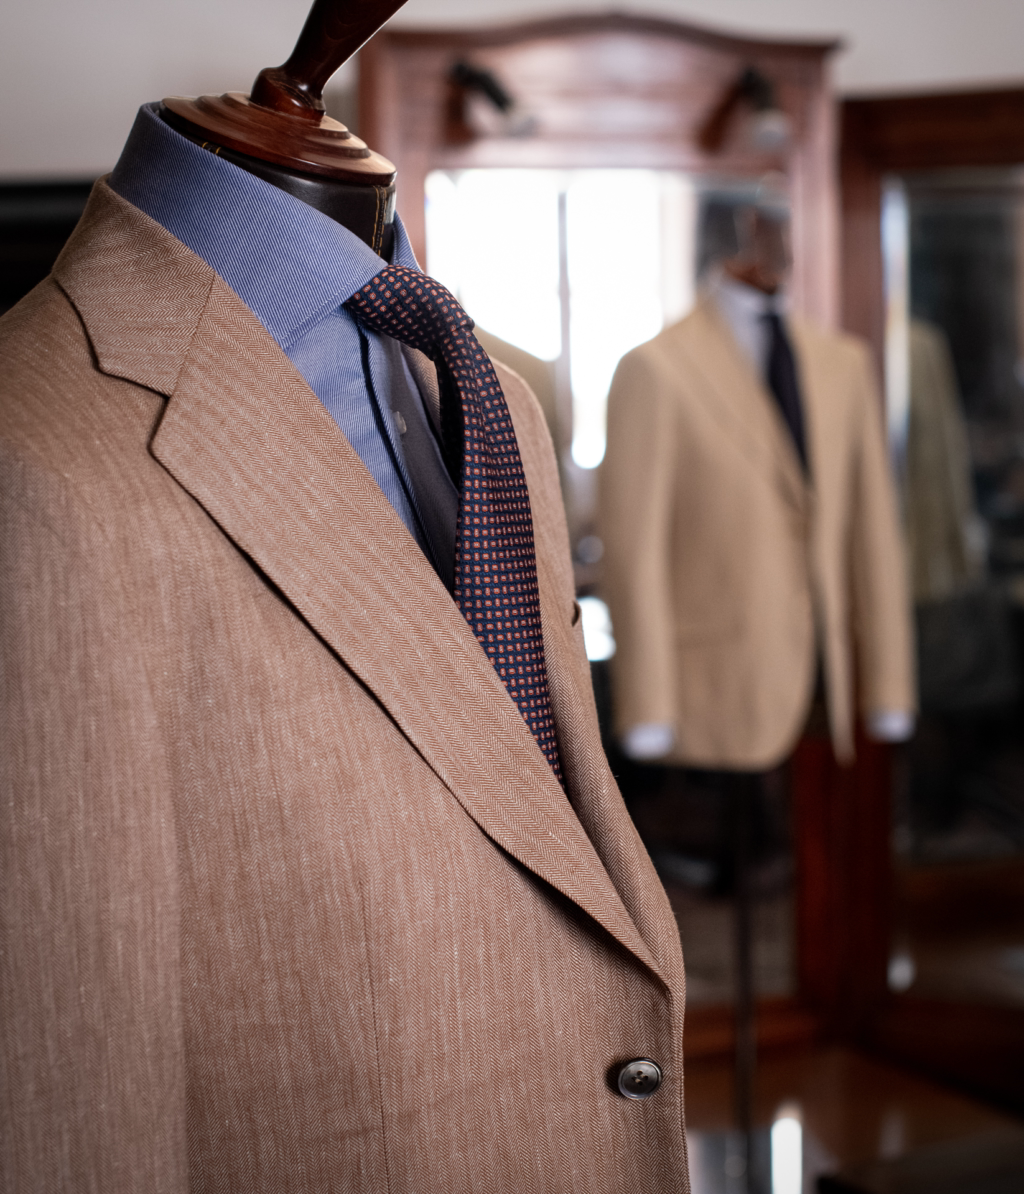 Giotto Caramel Linen Suit